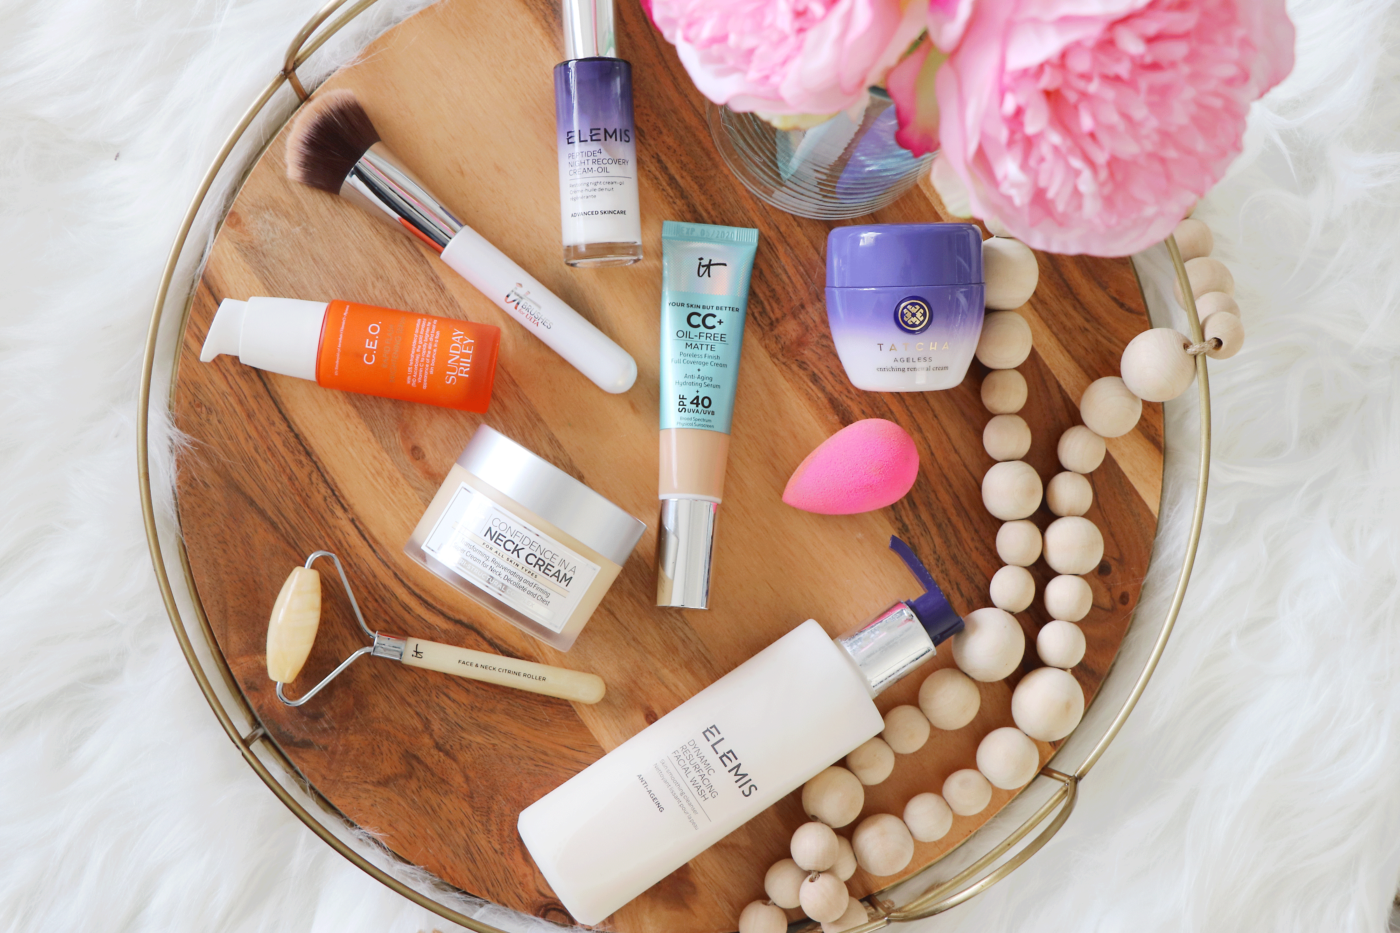 Looking for the best beauty and skincare finds? From SPF to eye cream- Makeup Life and Love is sharing the best QVC beauty + skincare deals happening right now. Click to see them HERE!